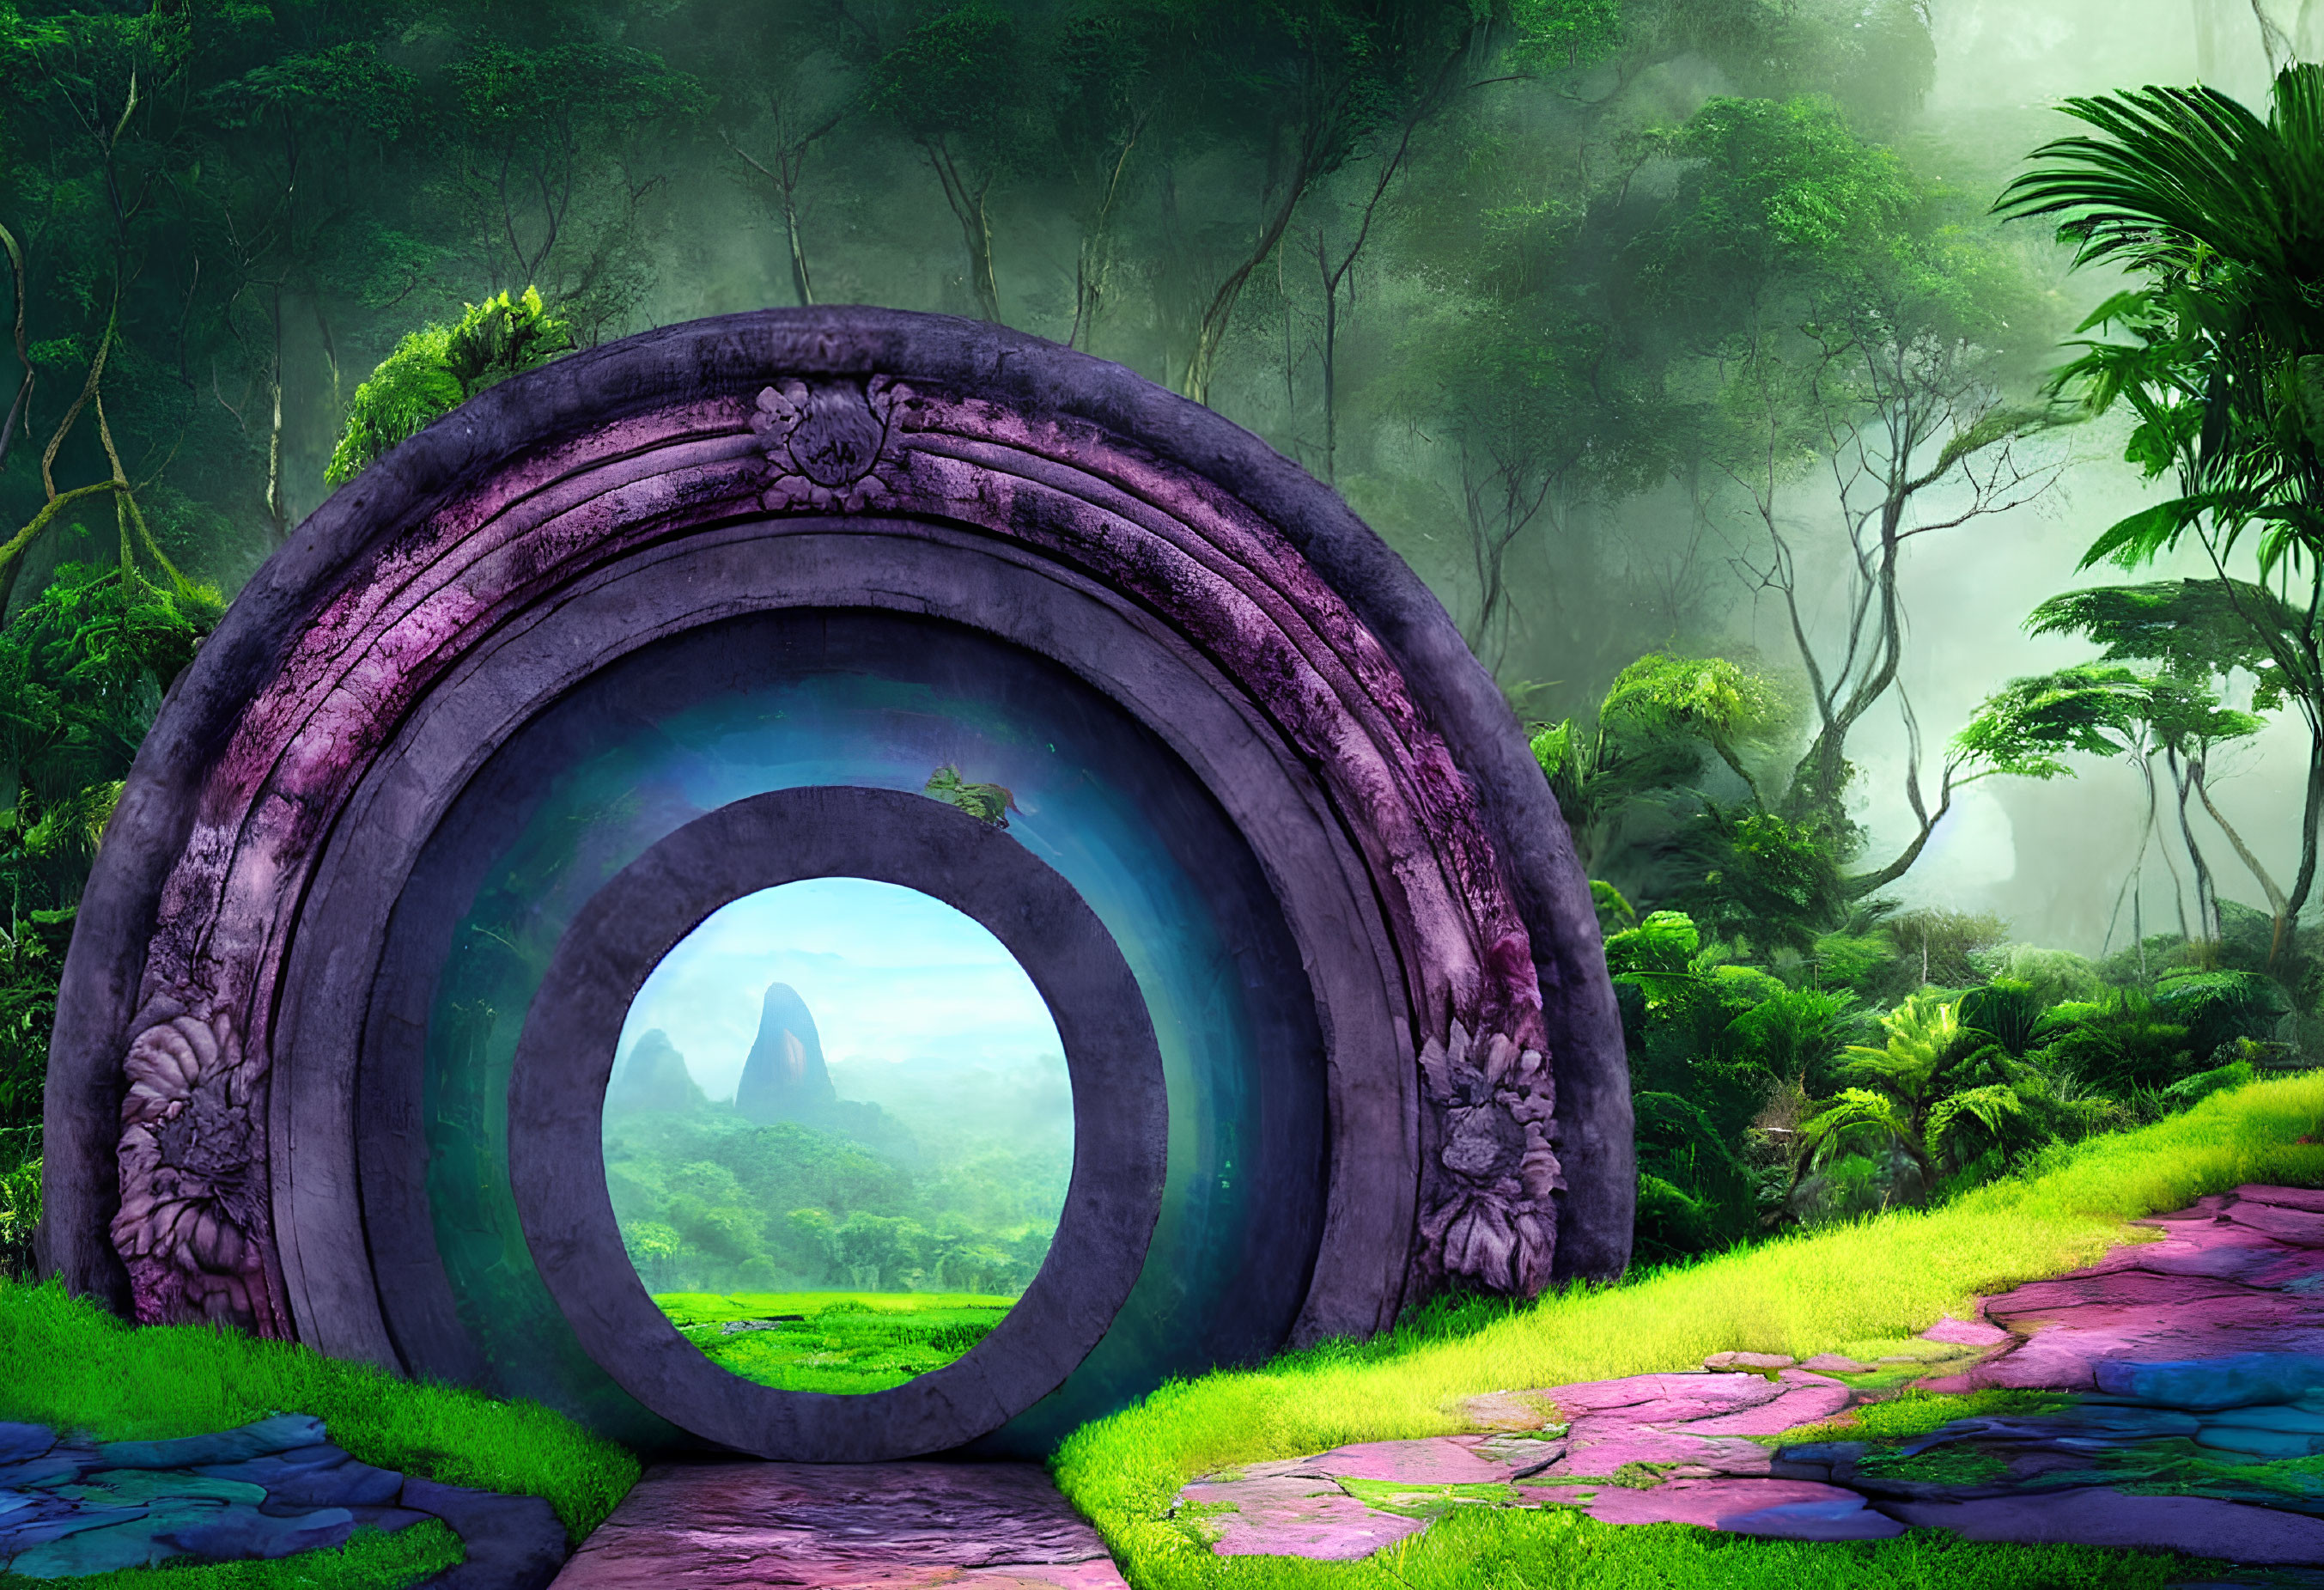 Stone circular portal with intricate carvings leading to lush green landscape and misty forest.